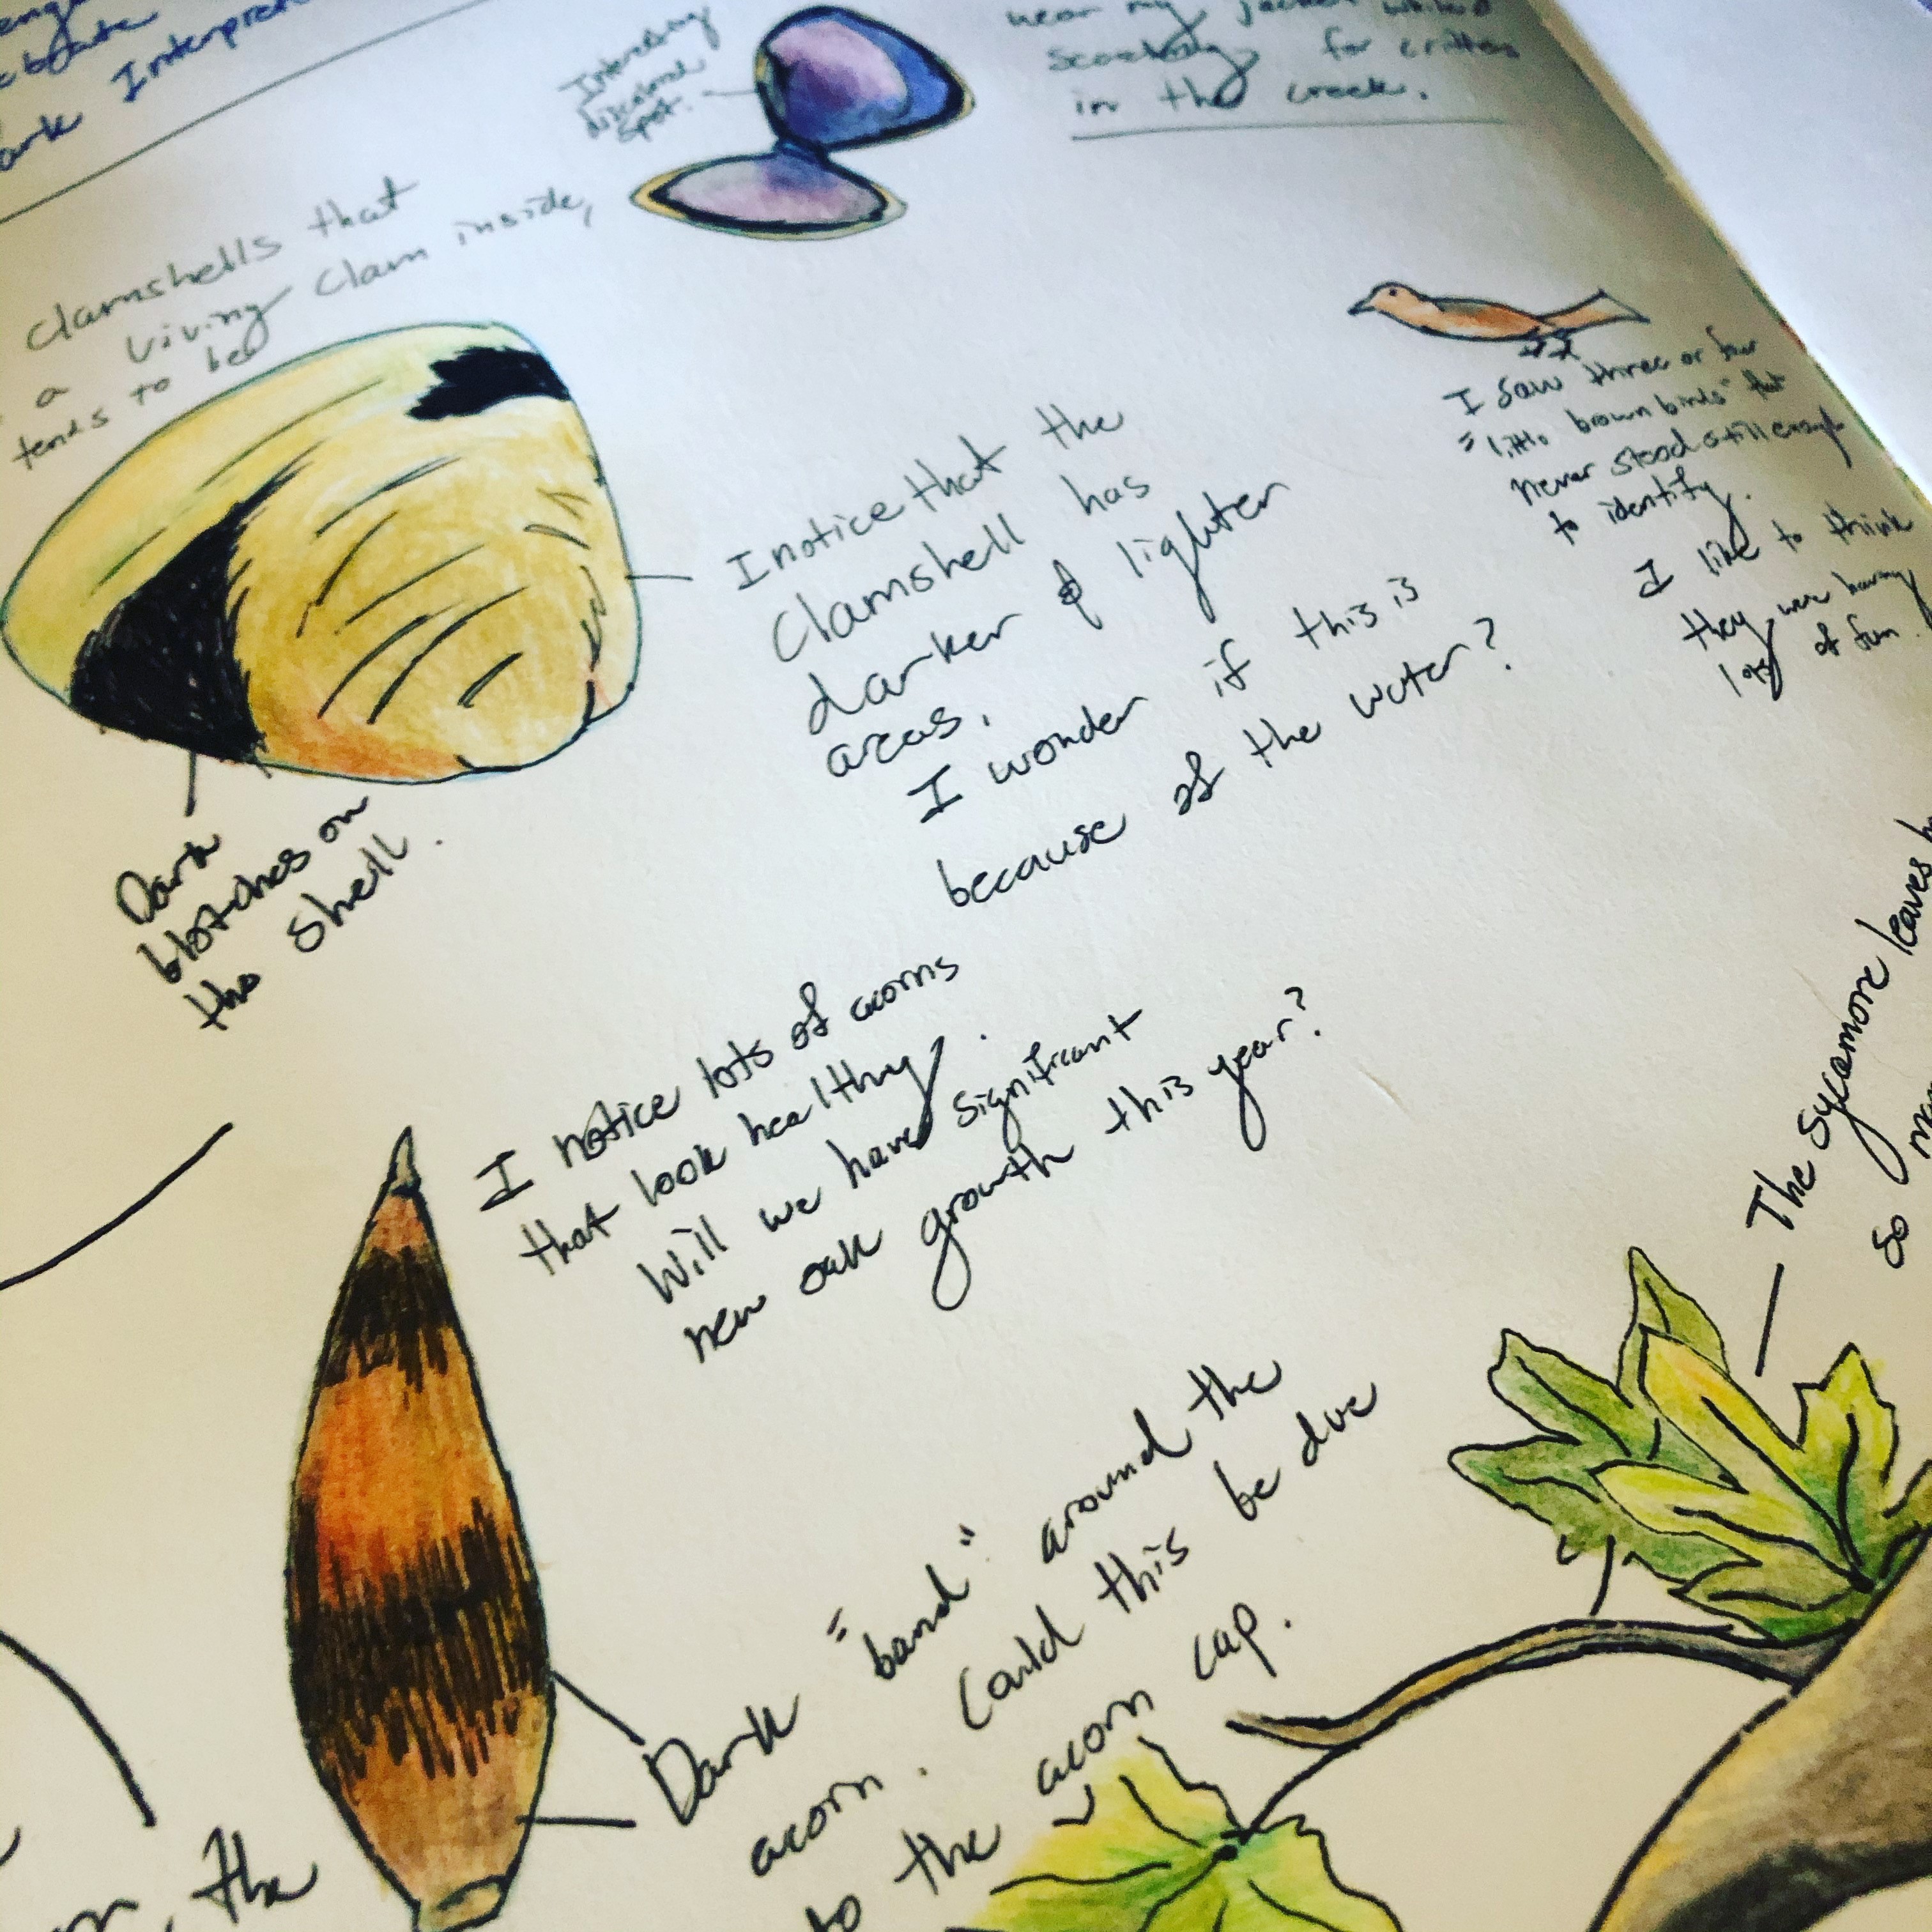 Nature journal page with color sketches and observation notes.